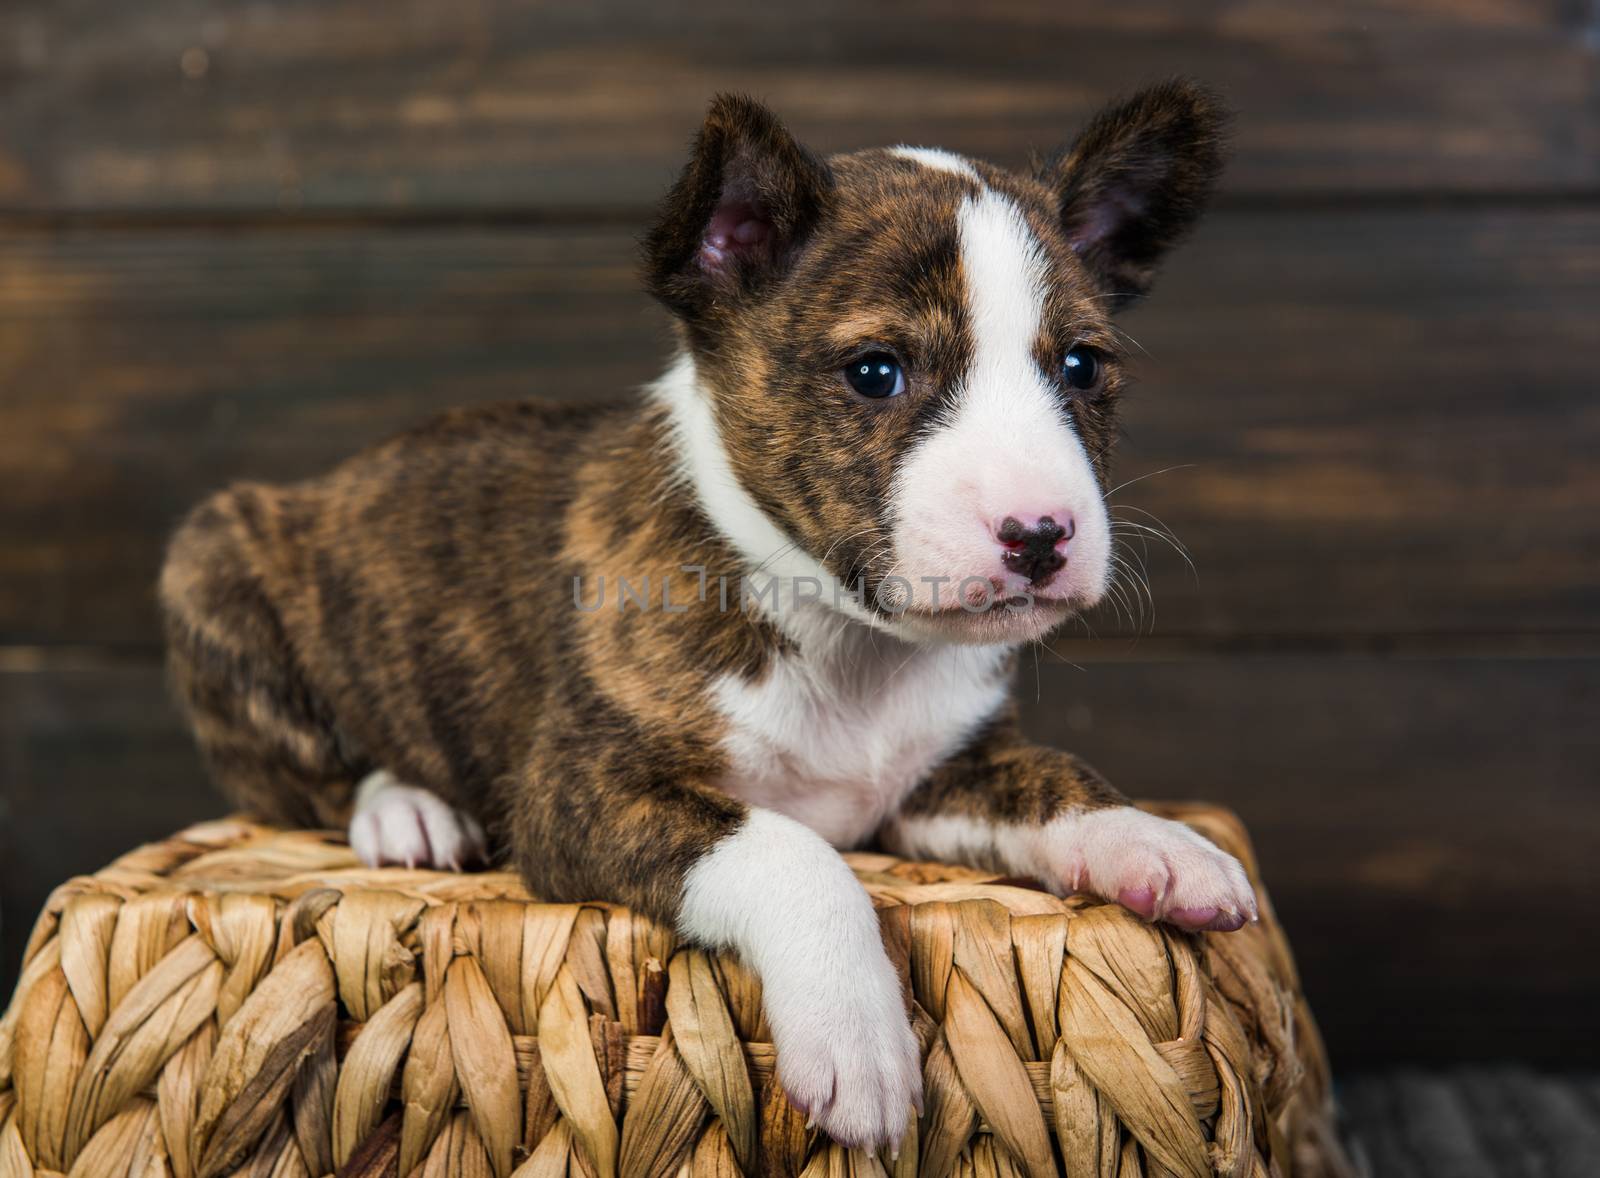 Basenji puppy dog in a basket on wooden background by infinityyy